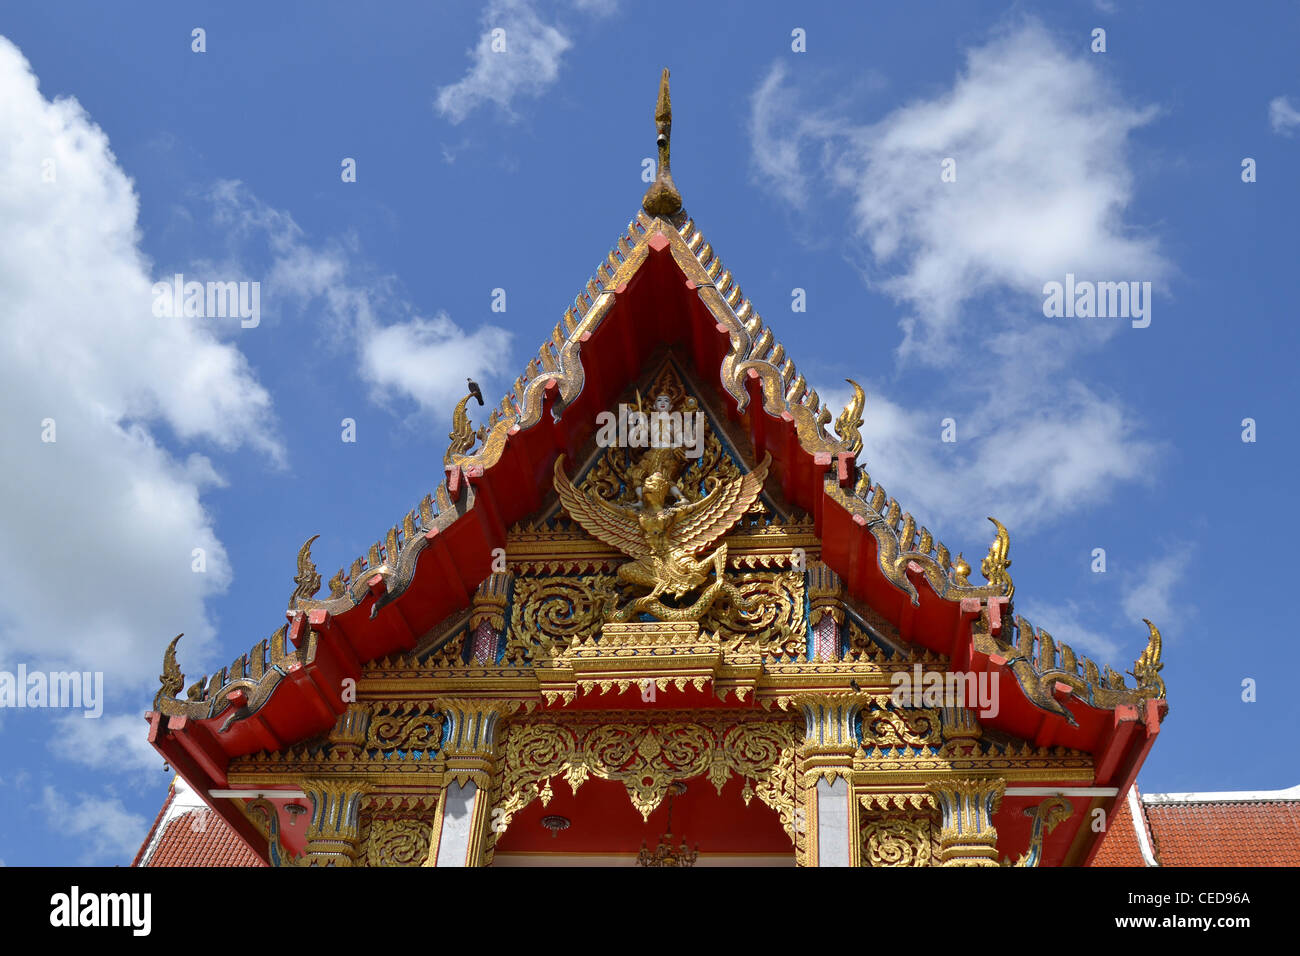 Temple Wat Chalong, the largest and most prominent of the 29 Buddhist temples of Phuket island, Thailand, Asia Stock Photo